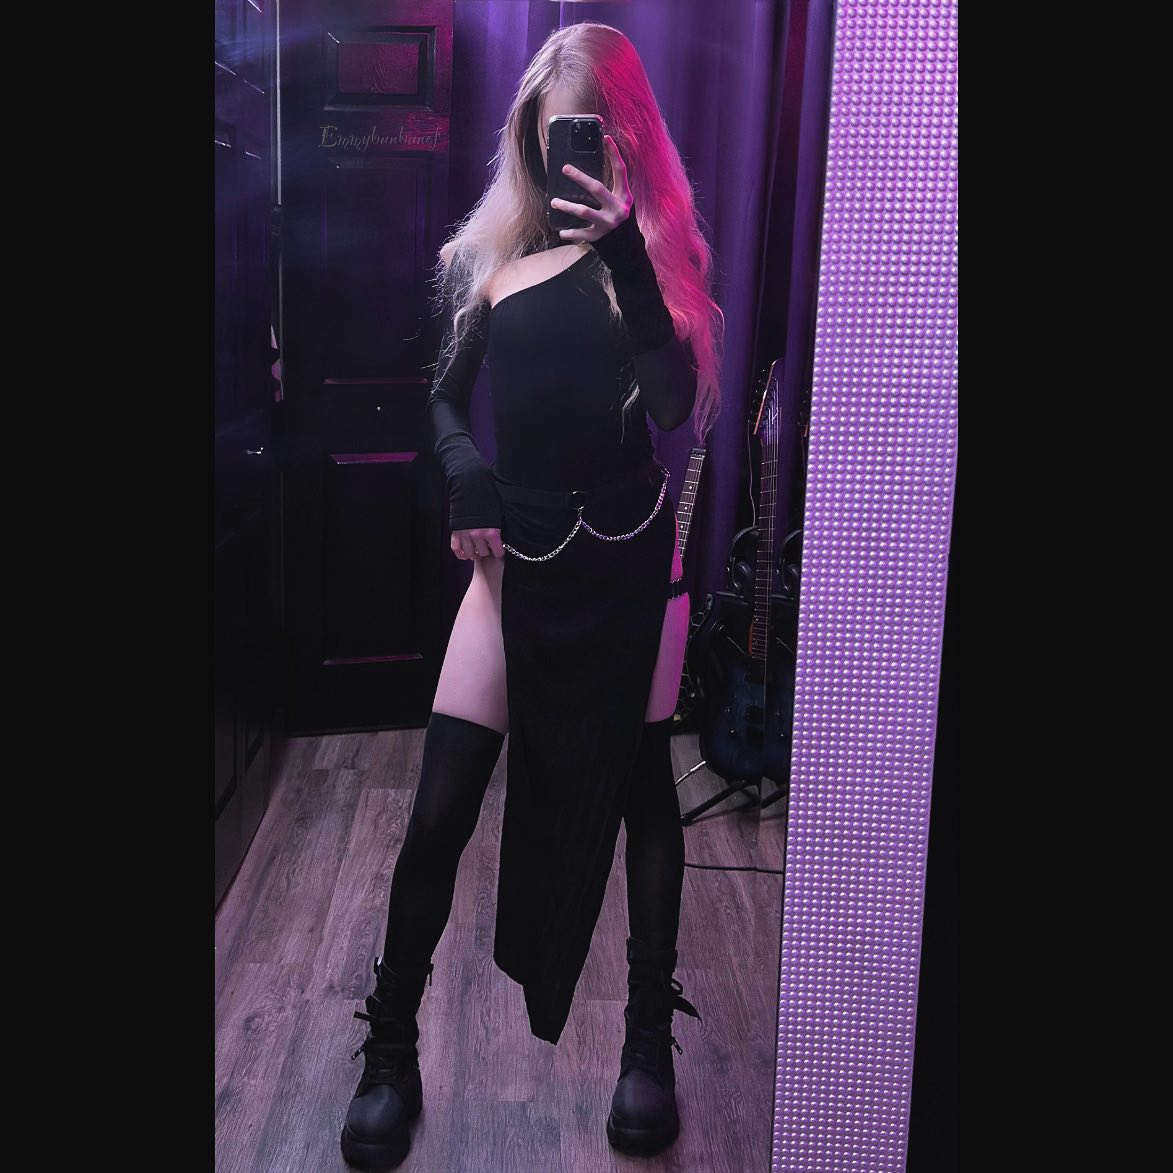 Knee high stockings literally make every fit better. I don’t make the rules 🤷🏼‍♂️

 #altgirl #altfashion #gothic #egirl